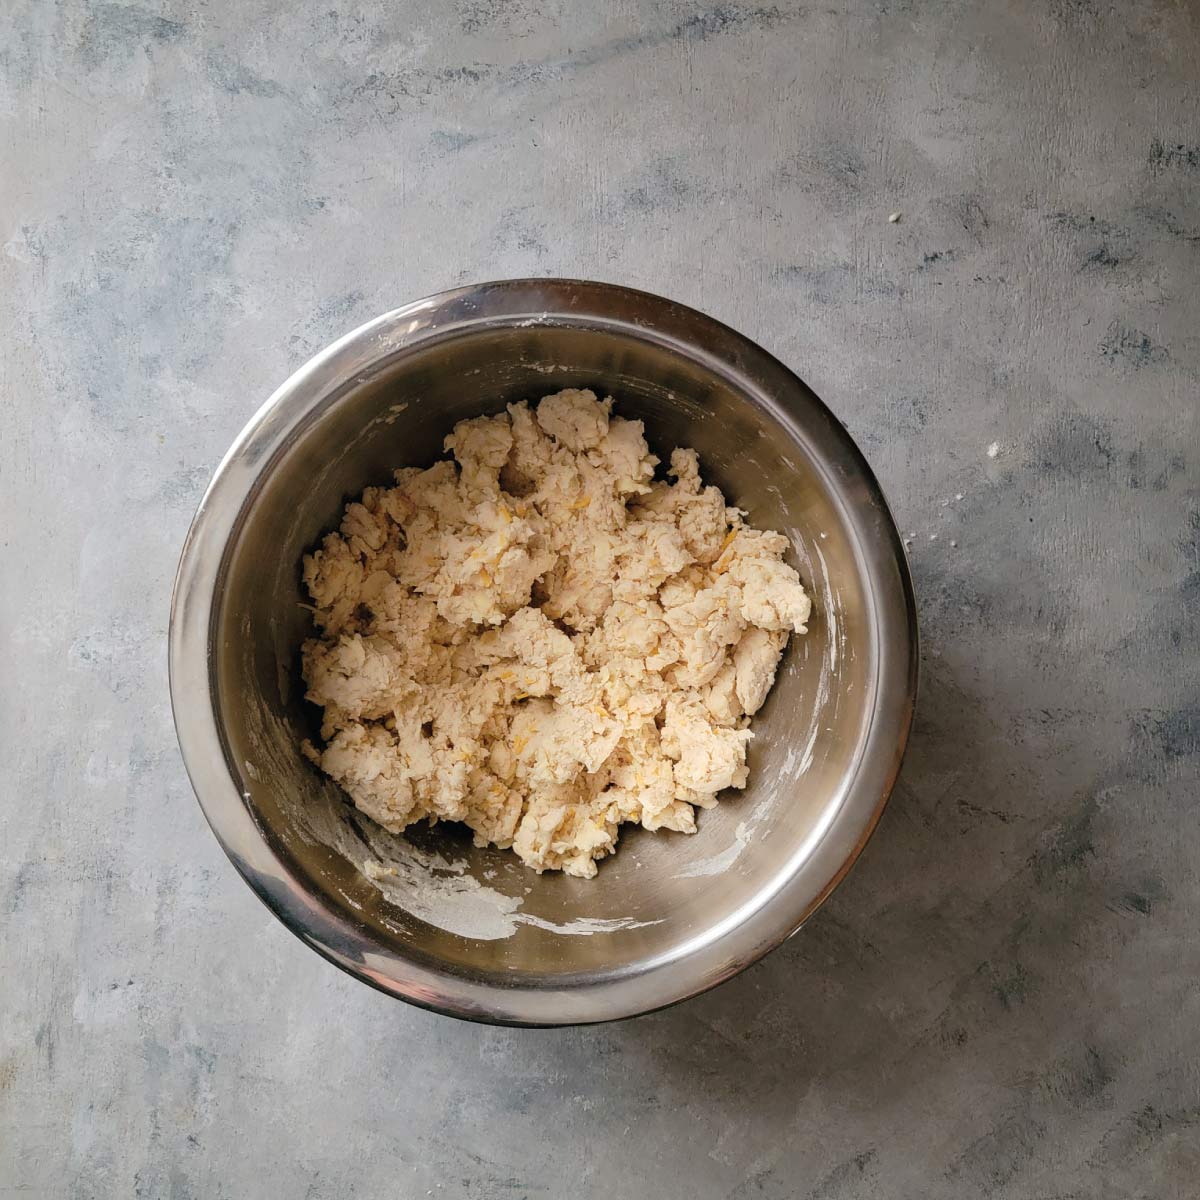 Biscuit dough in a mixing bowl after mixing all ingredients.